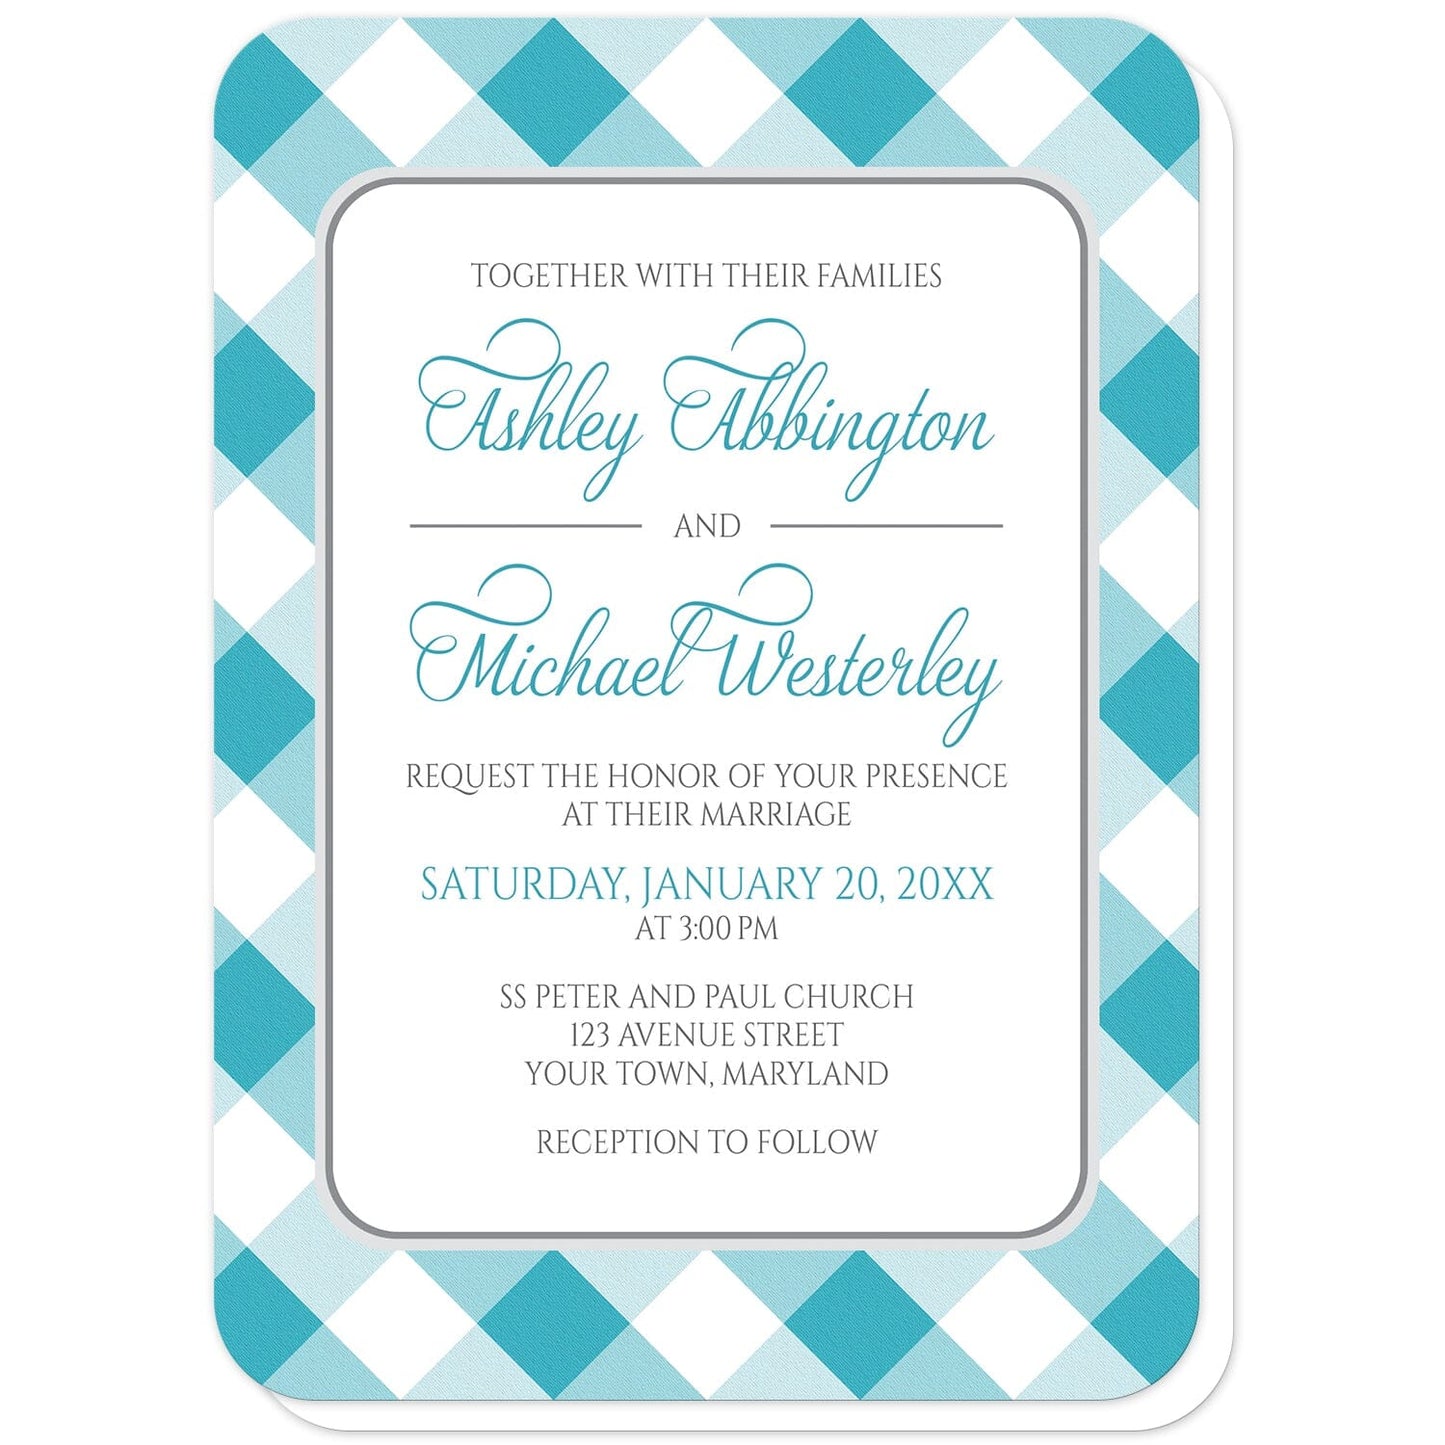 Turquoise Gingham Wedding Invitations (with rounded corners) at Artistically Invited. Turquoise gingham wedding invitations with your personalized wedding ceremony details custom printed in turquoise and gray inside a white rectangular area outlined in gray. The background design is a diagonal turquoise and white gingham pattern. 